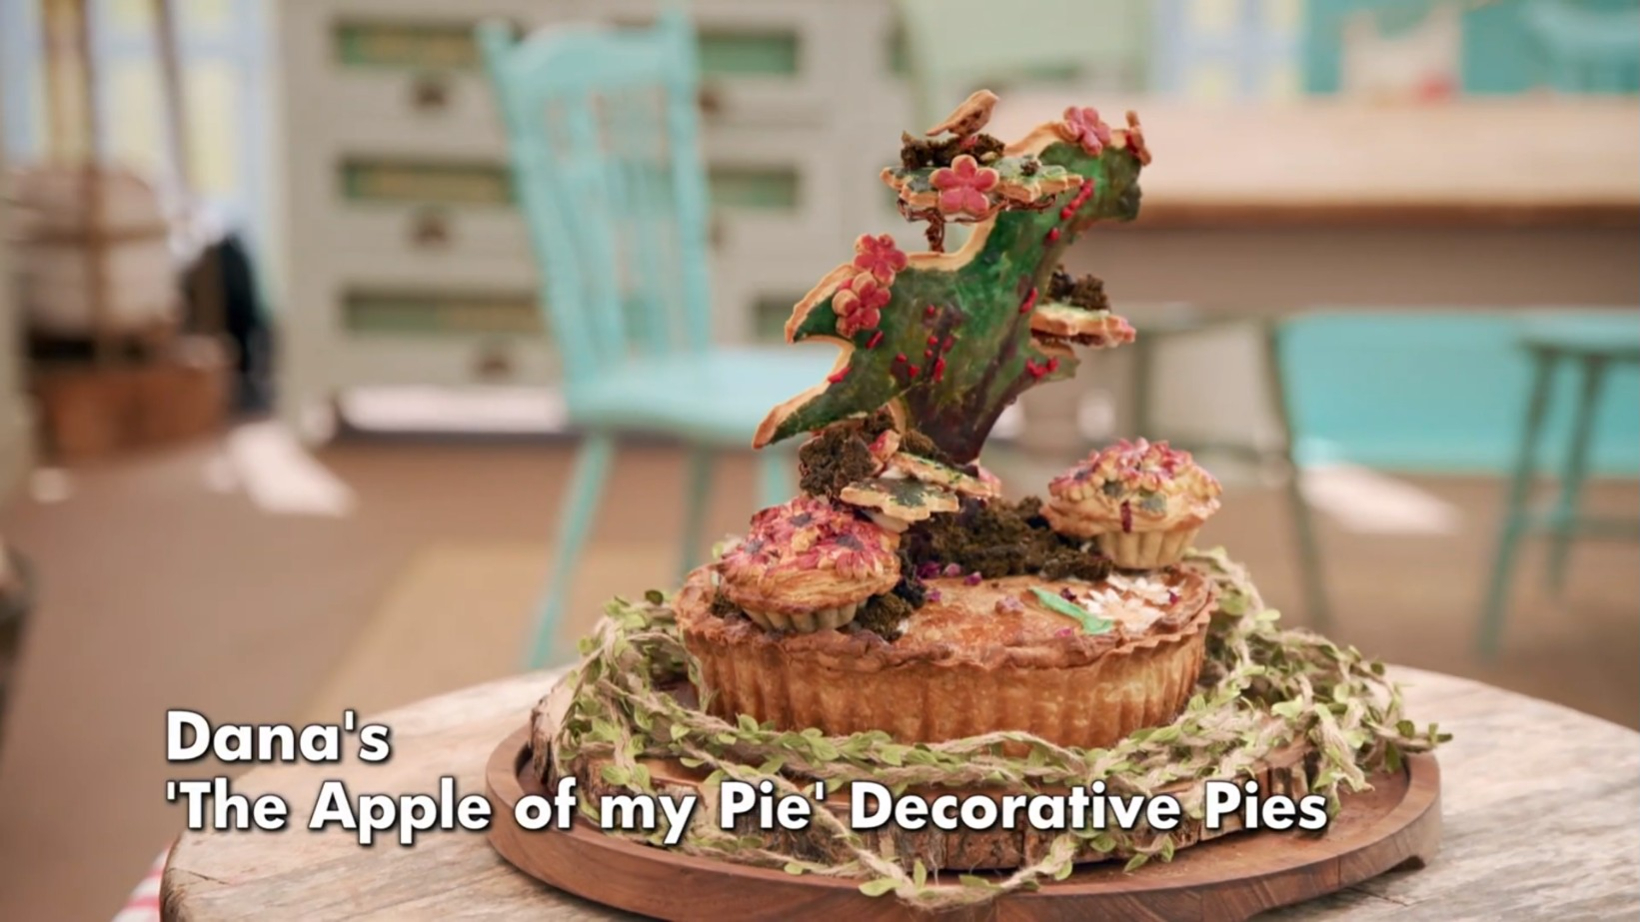 Dana's The Apple of my Pie Showstopper from 'The Great British Baking Show' Season 14's Pastry Week 